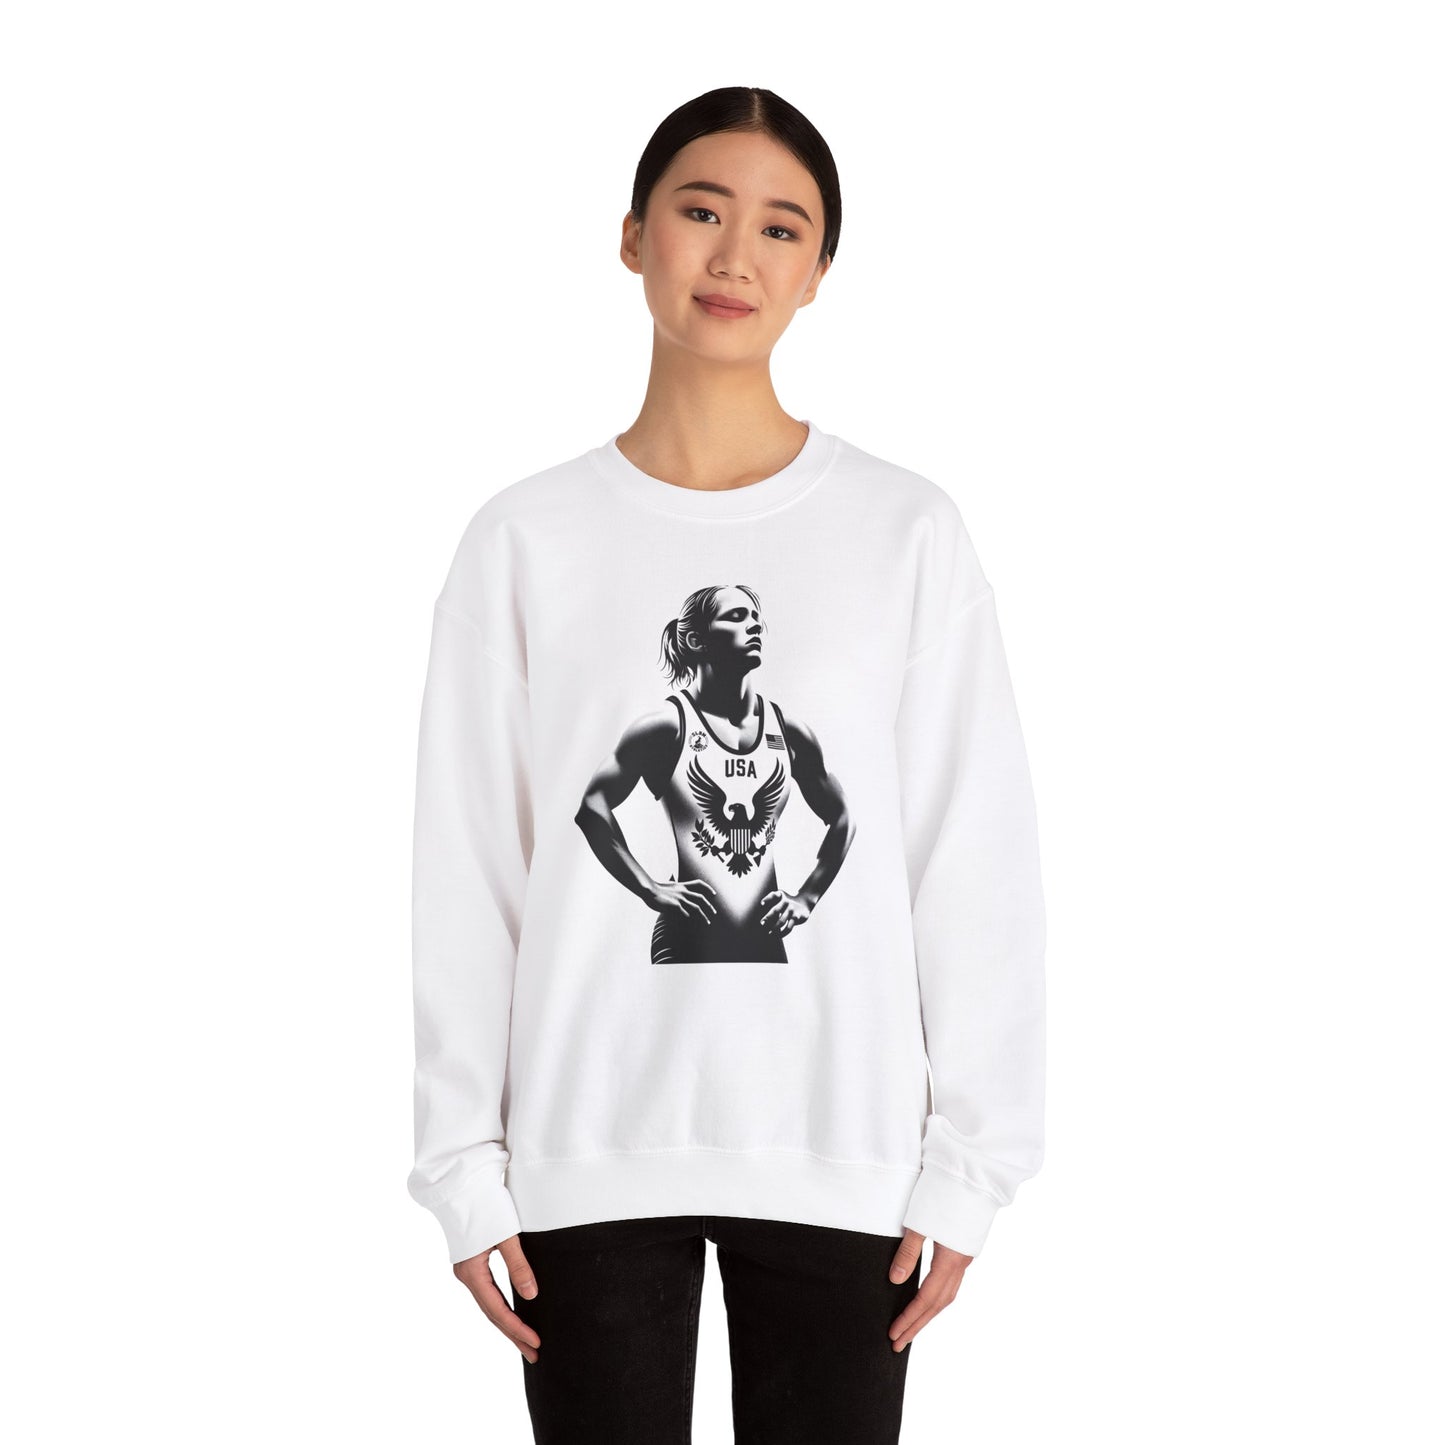 Keep Showing Up - Sincerely, Wrestling" Girls' Crew Neck Sweater